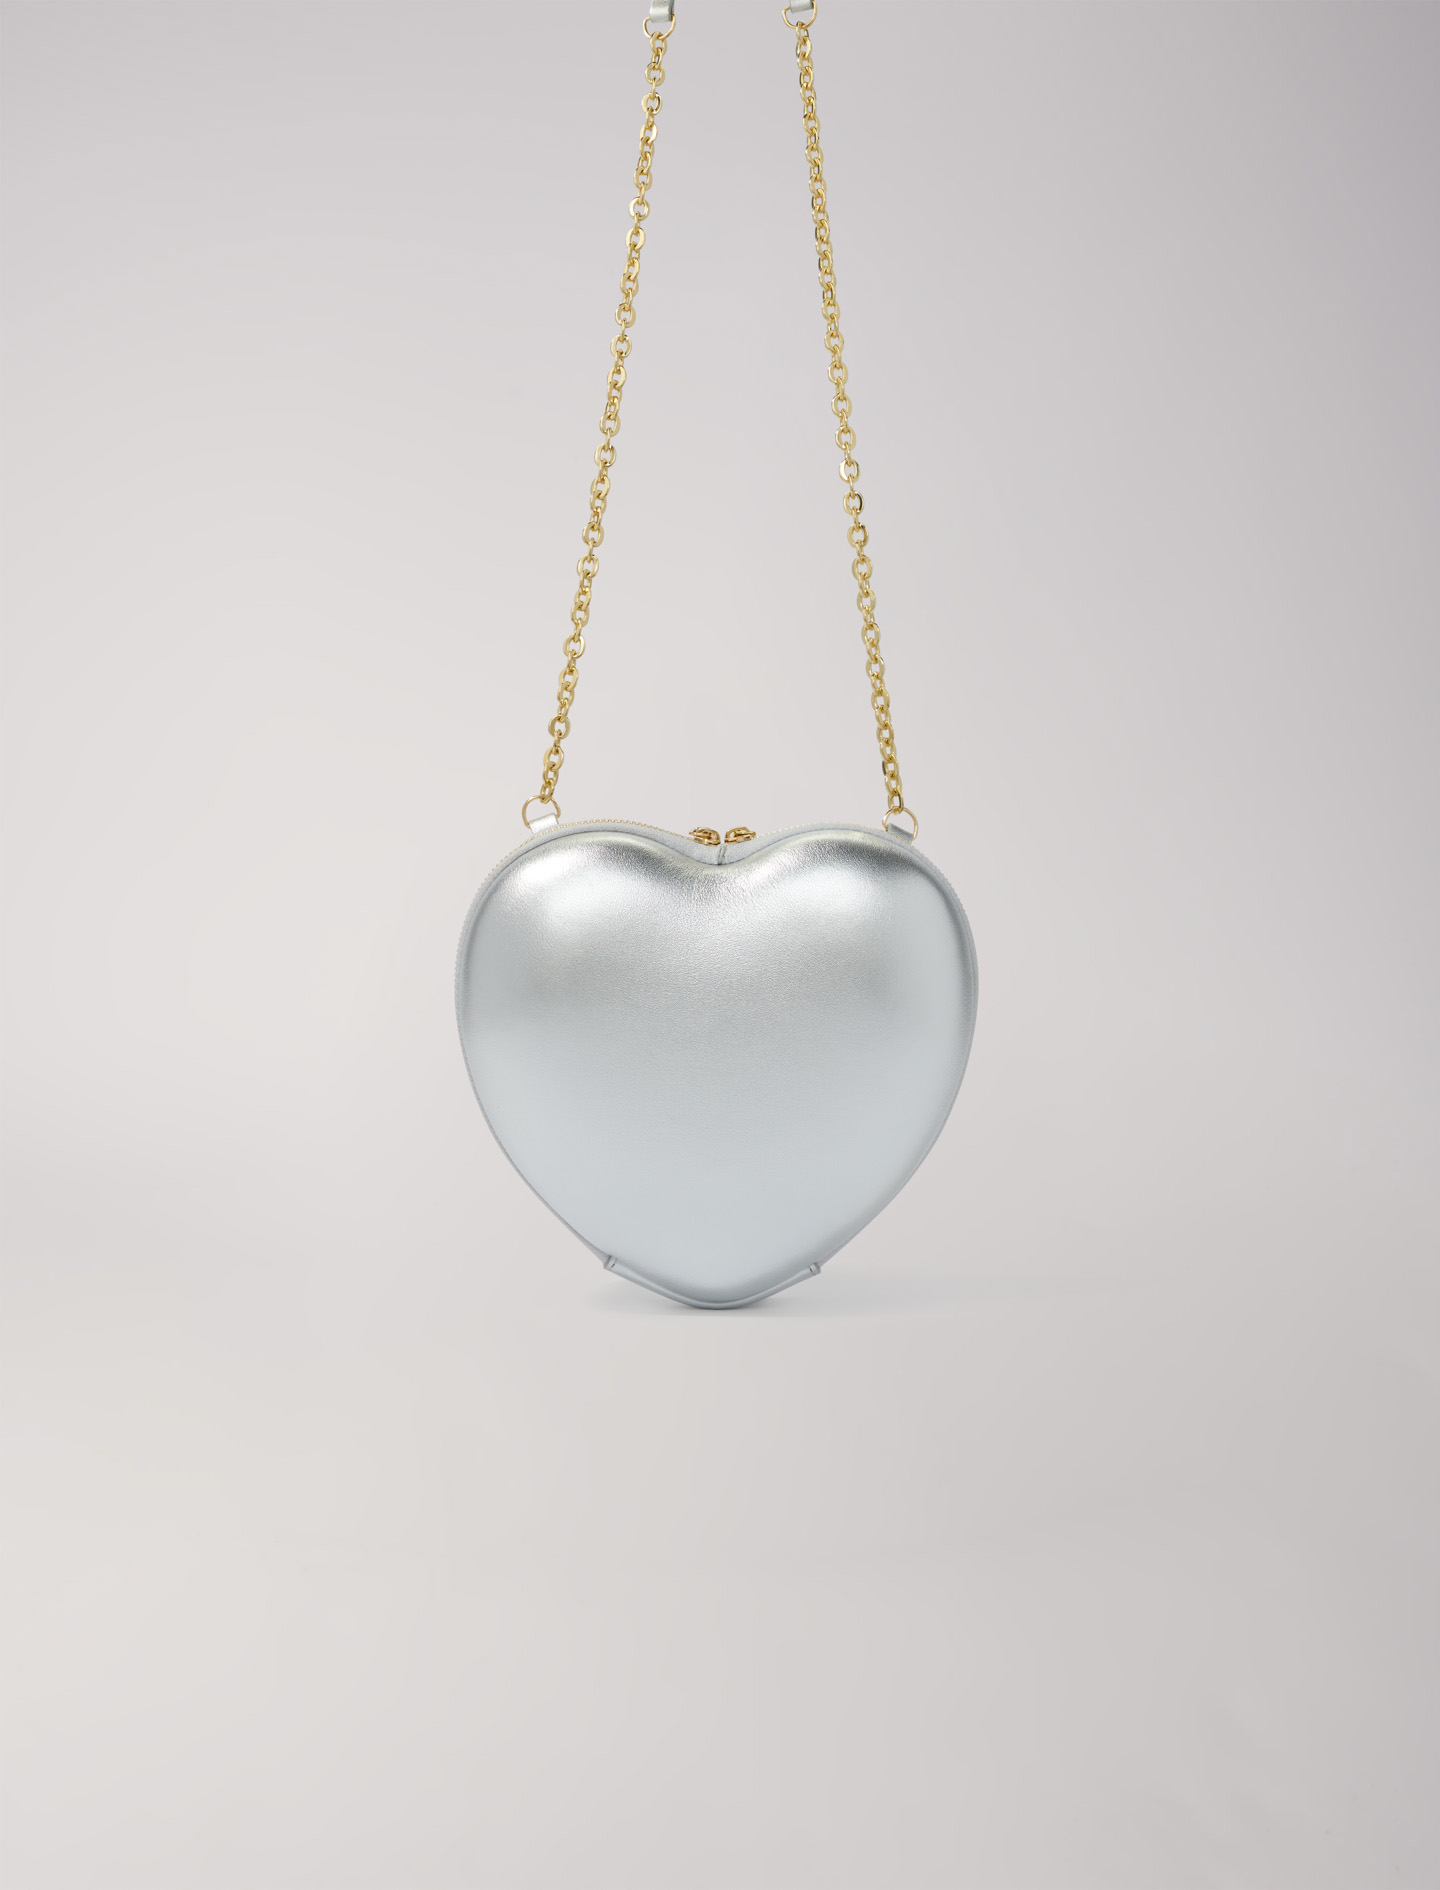 Maje Woman's cotton Chain: Heart-shaped leather bag for Spring/Summer, in color Silver / Grey